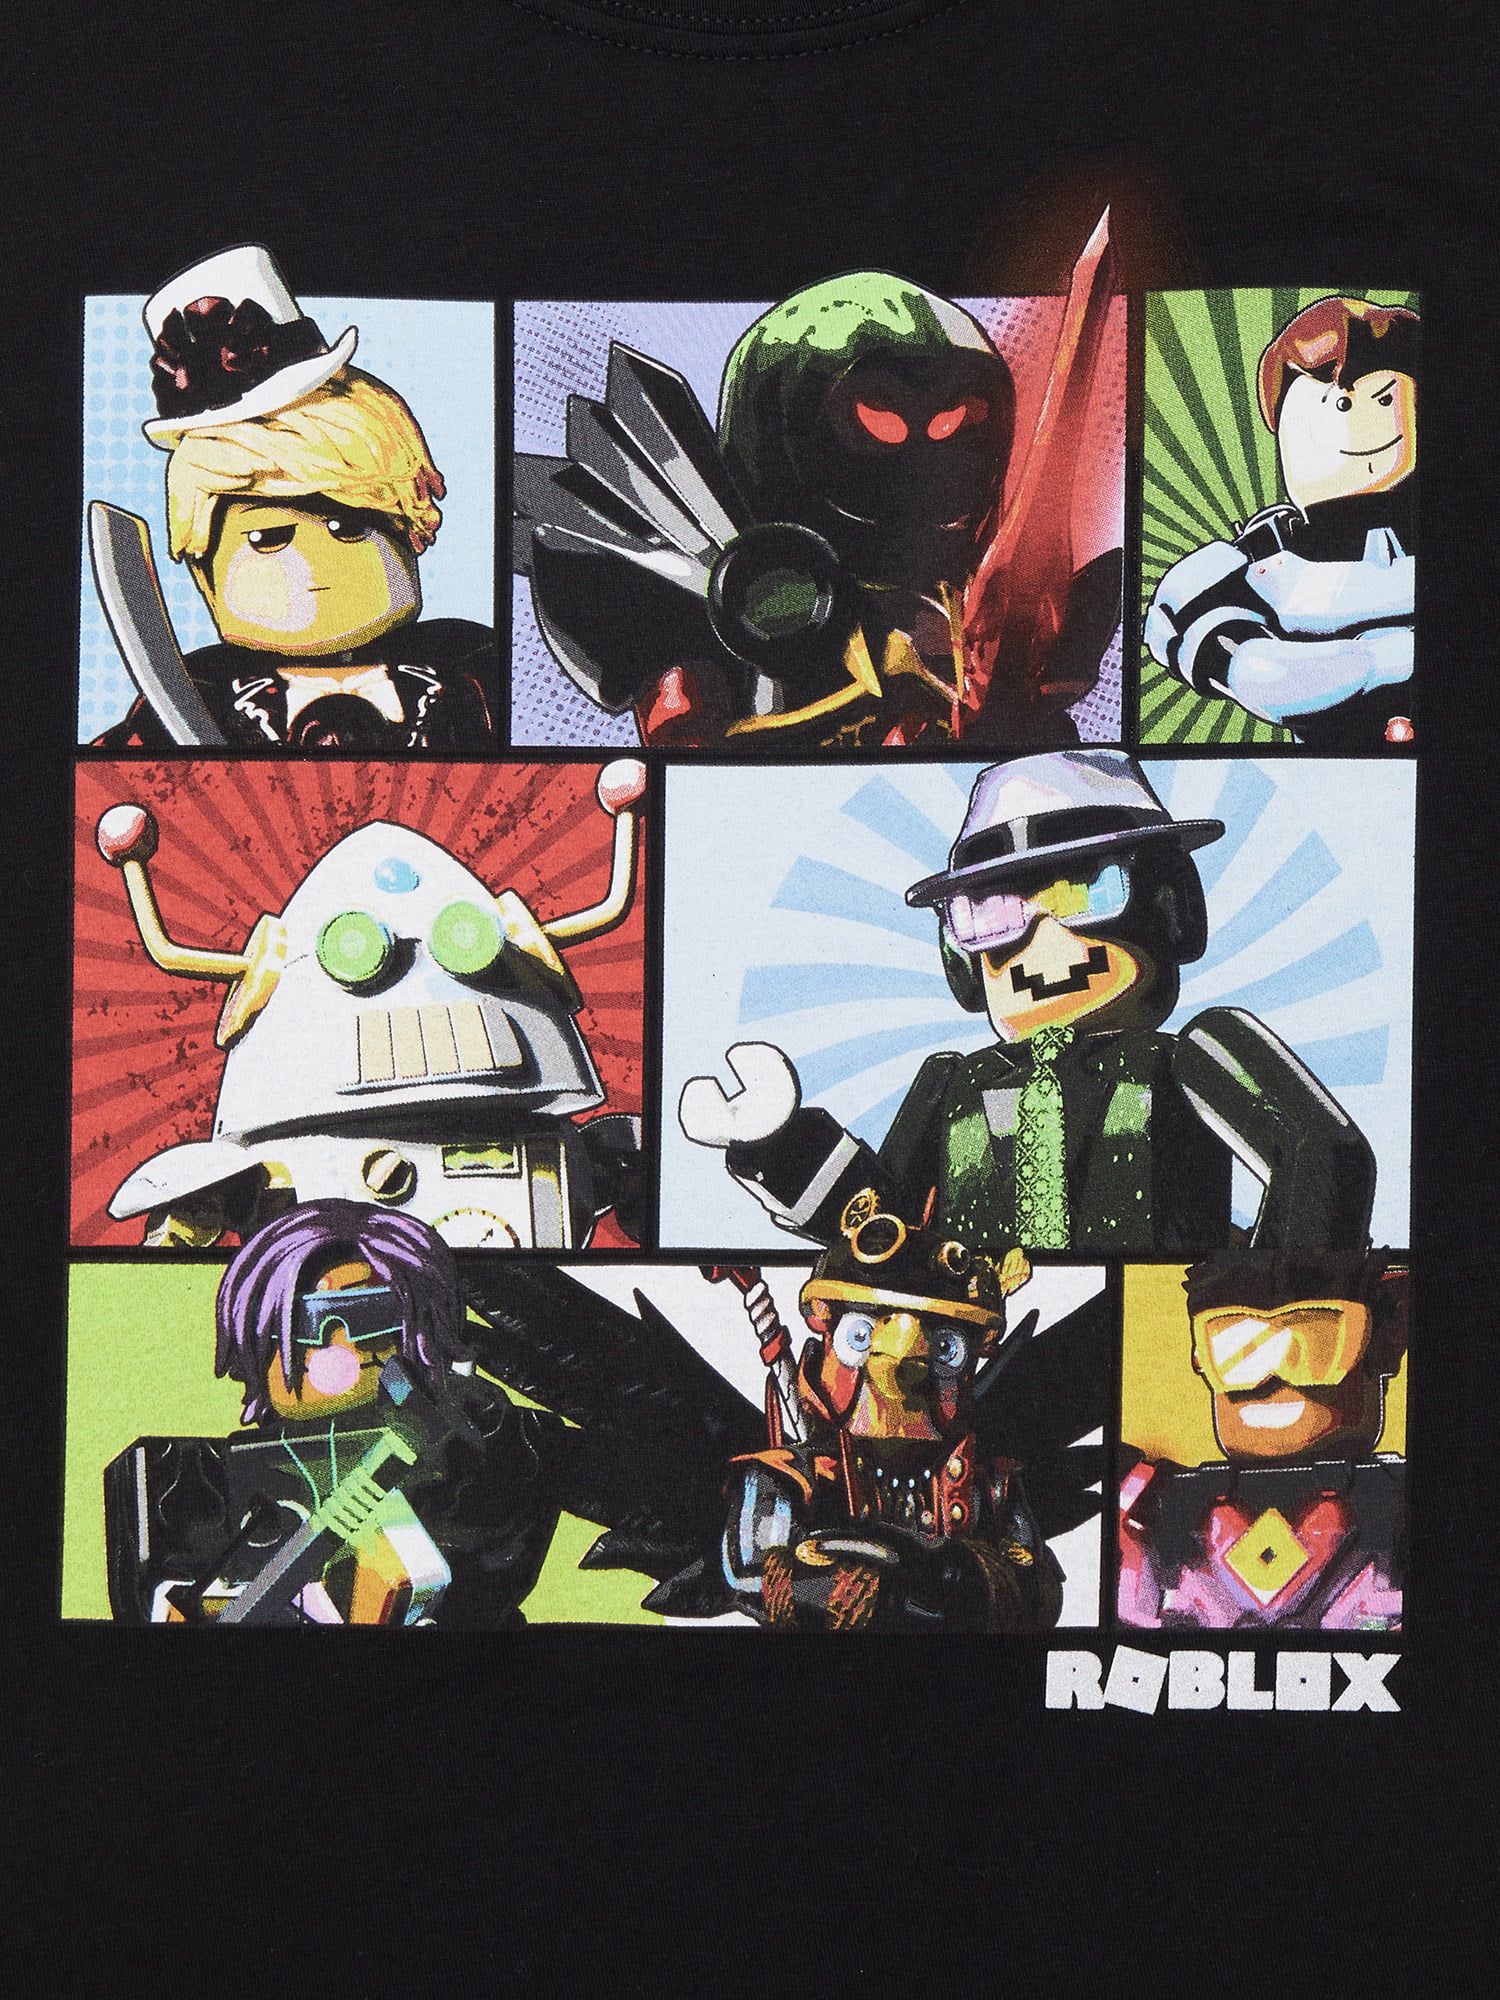 Roblox Boys Graphic T-Shirt, 2-Pack, Size 4-18 